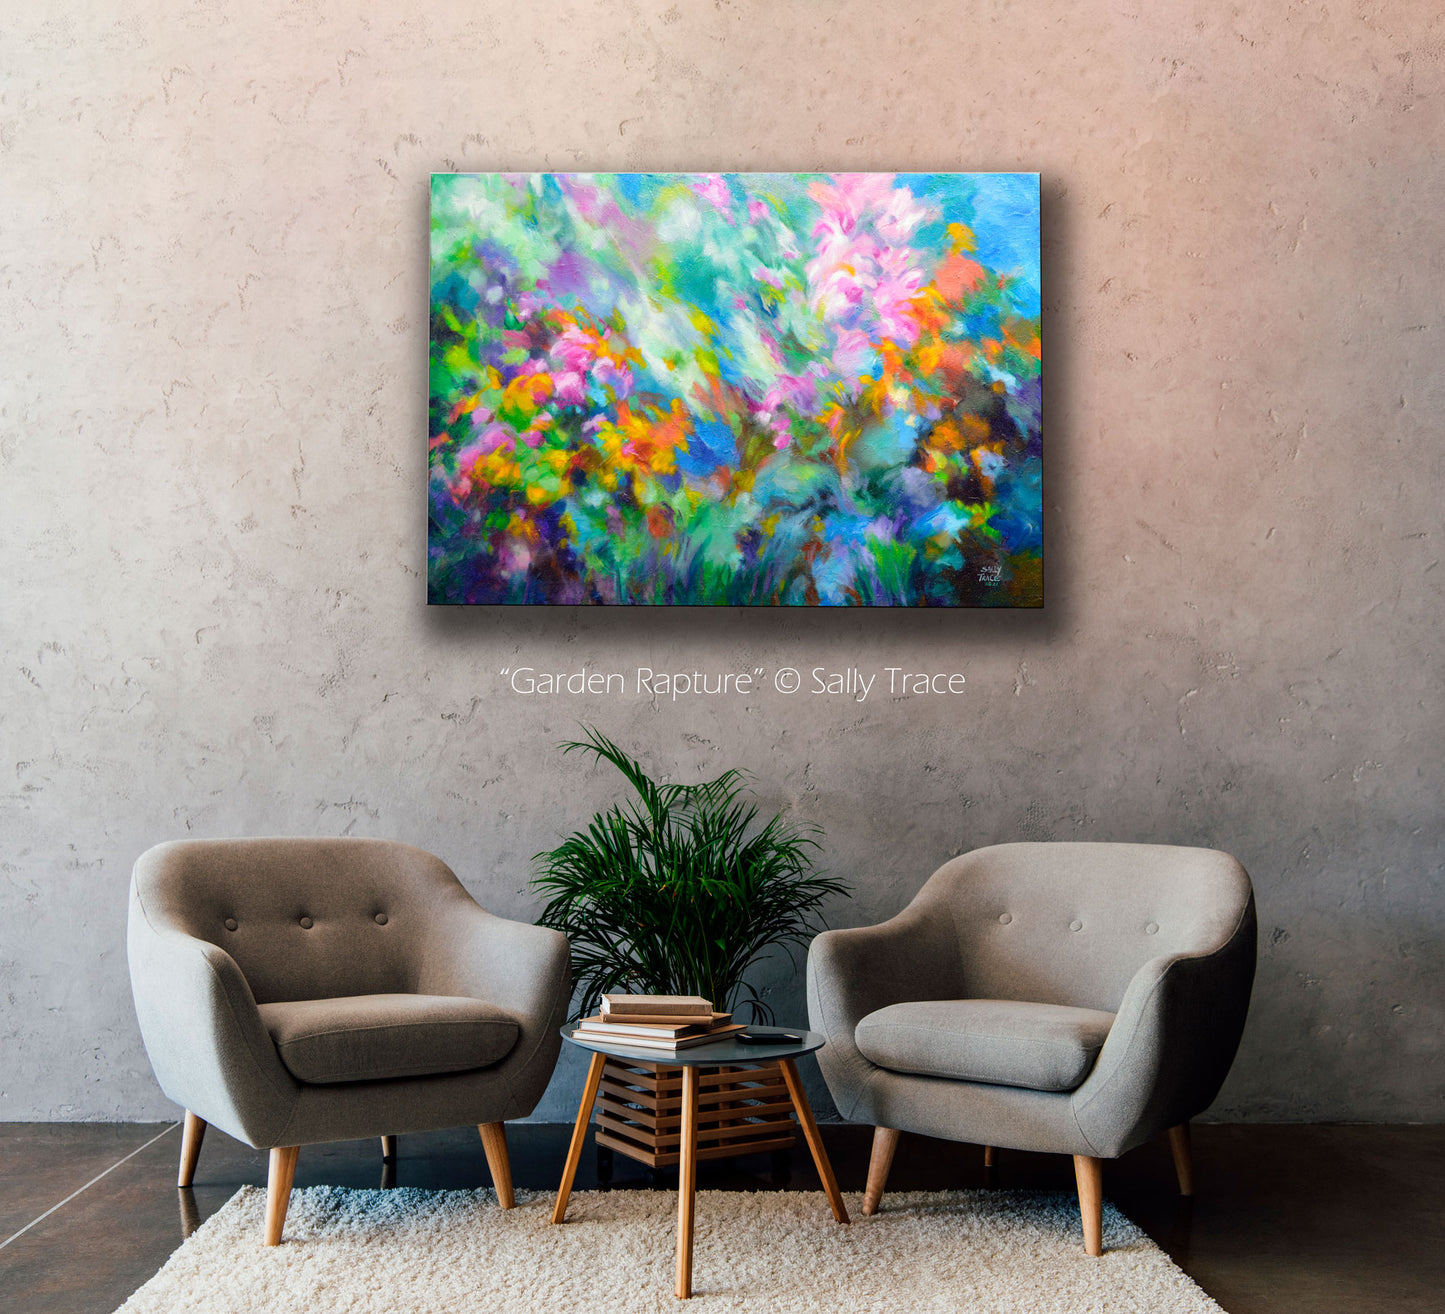 Abstract mixed media textured impasto painting "Garden Rapture" 24x36 inches, 1.5 inches deep with a very textured surface.  Original abstract art for sale.  I was really enjoying the late summer blossoms this year, and the feeling made it's way into this painting.  Filled with beautiful, colorful summer floral blossoms. room view.